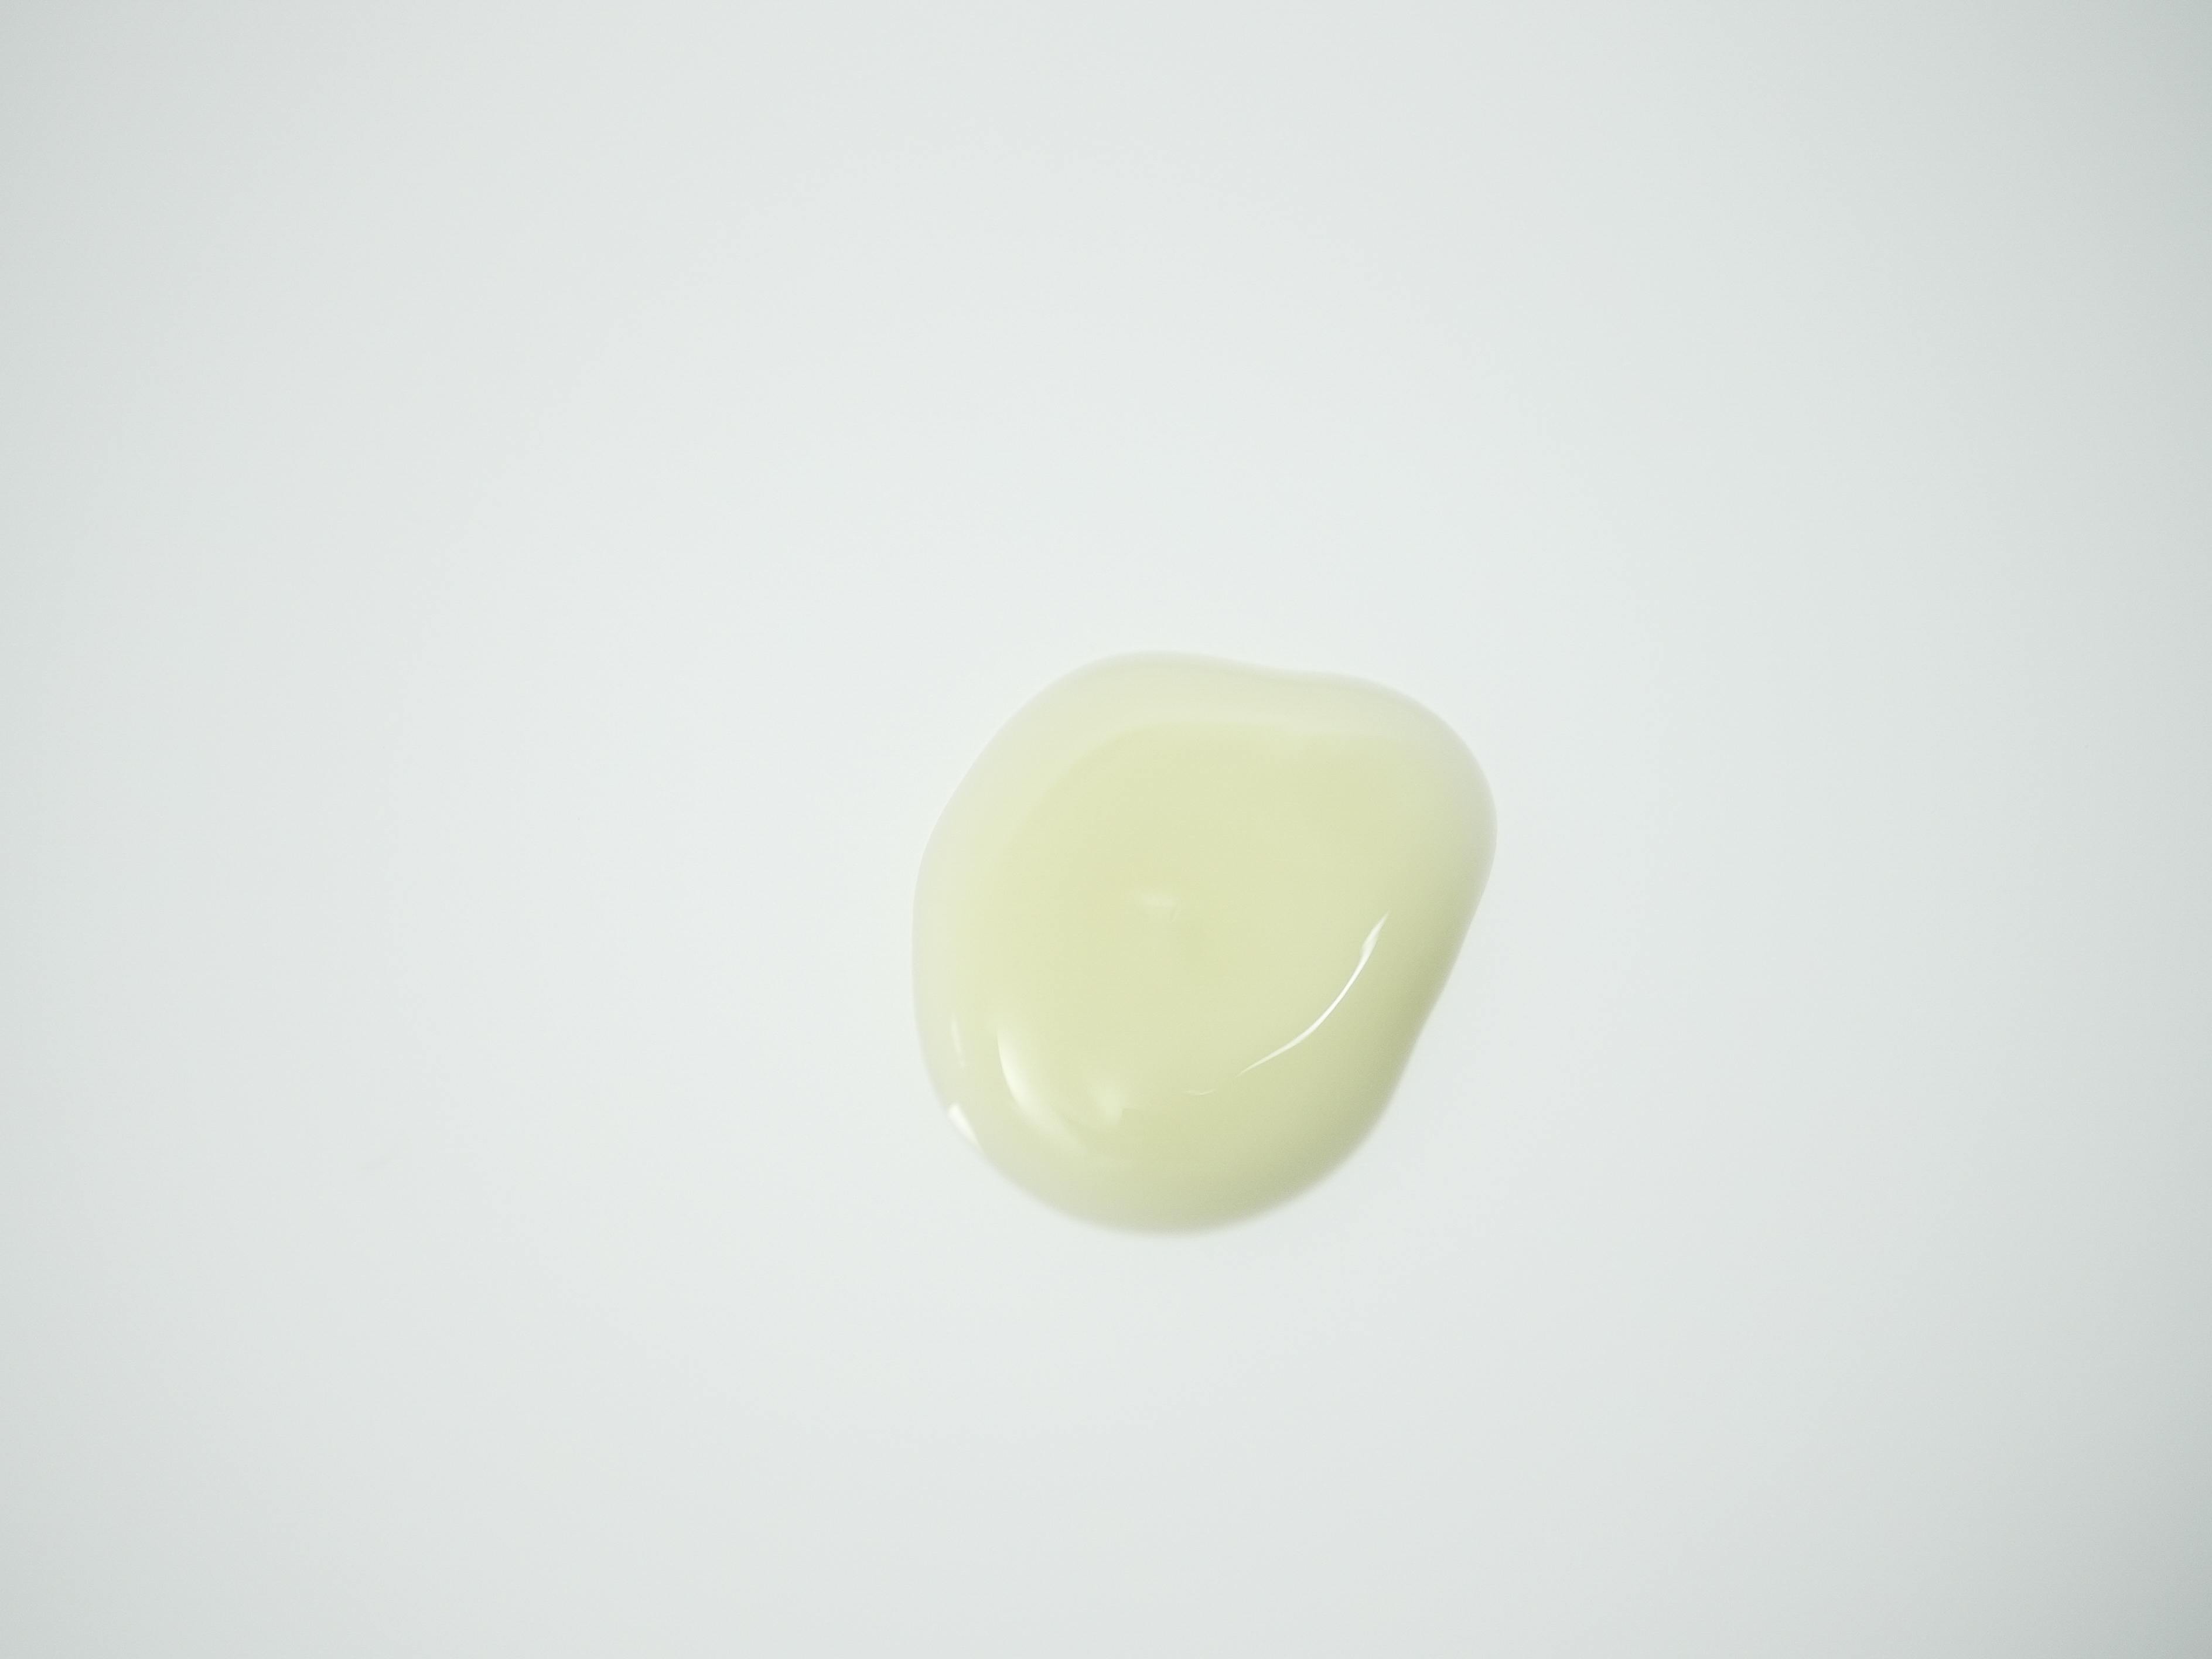 Pale yellow serum on a white background